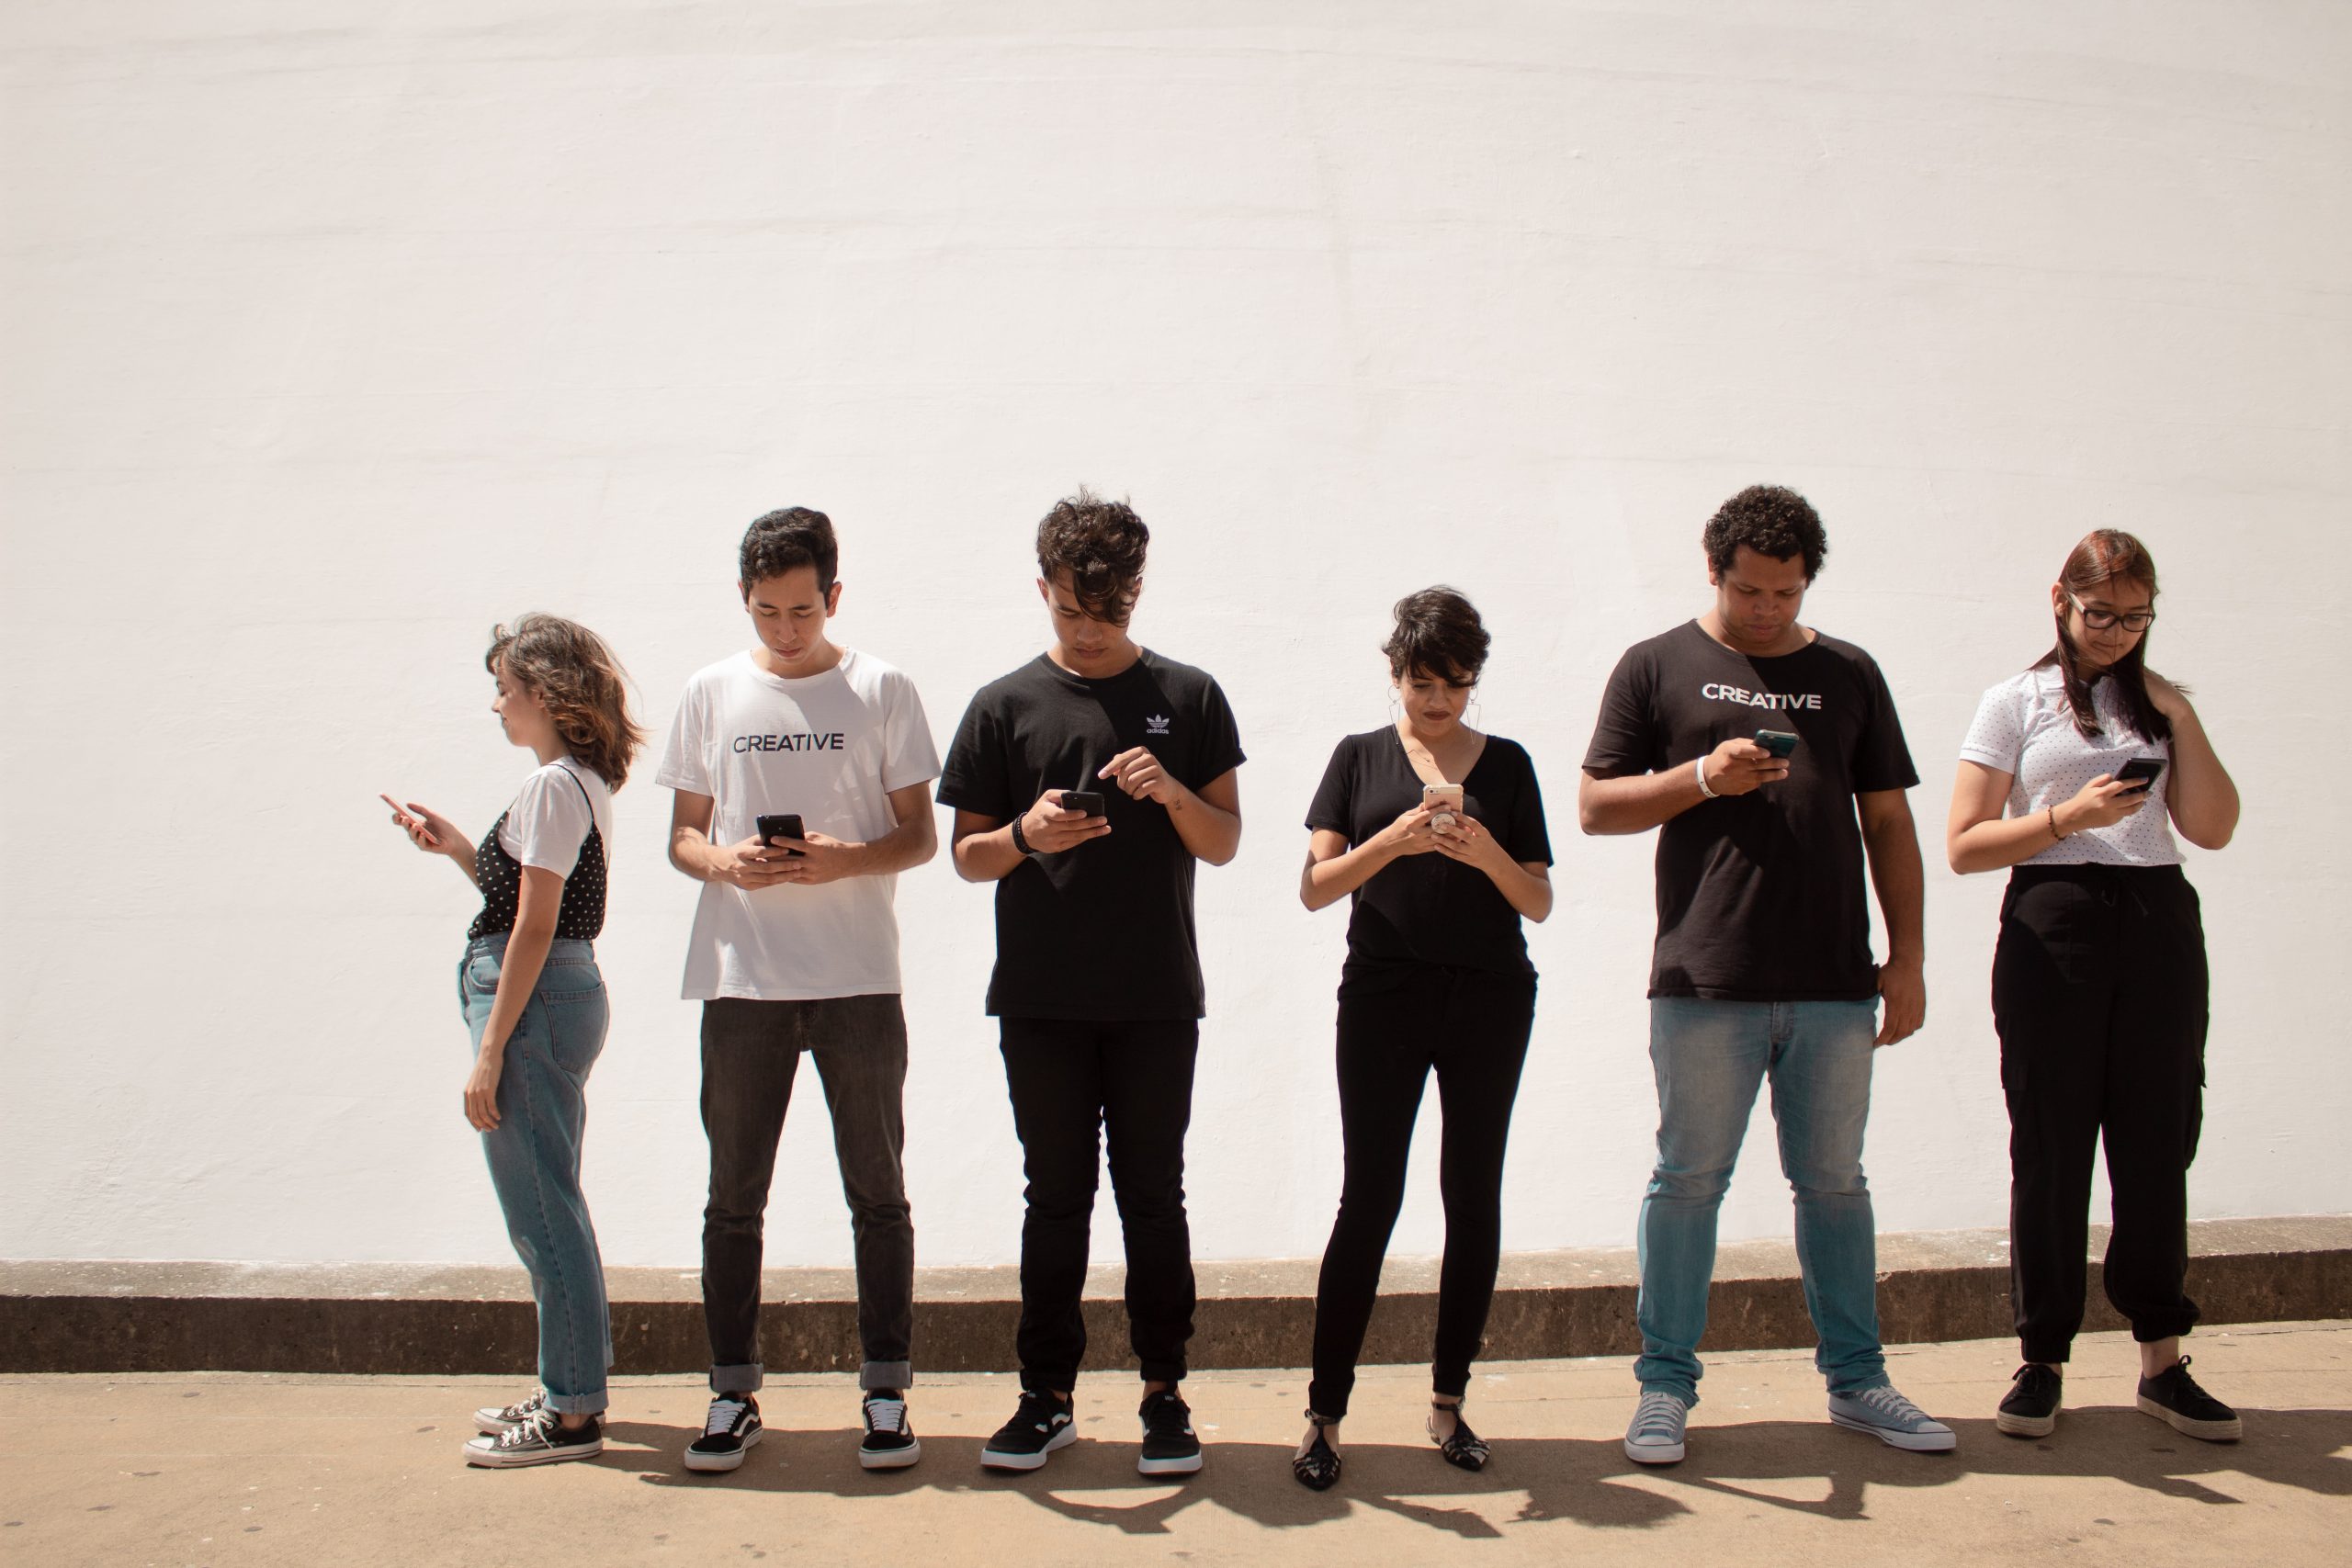 A group of young people, standing together but all looking into their smartphones